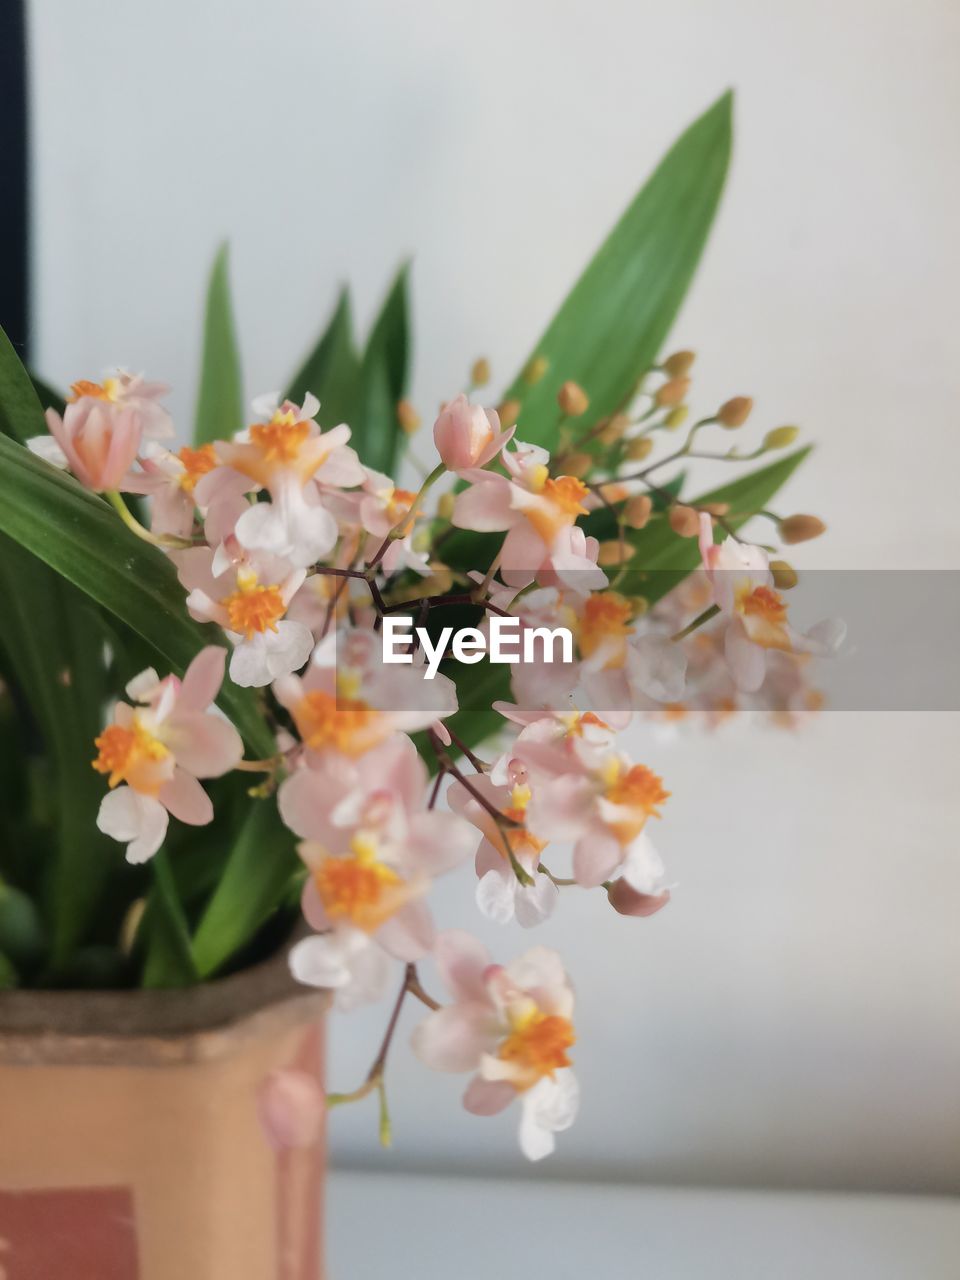 plant, flower, flowering plant, freshness, beauty in nature, nature, fragility, close-up, floristry, spring, no people, growth, flower head, indoors, vase, blossom, yellow, houseplant, bouquet, flower arrangement, focus on foreground, flowerpot, springtime, floral design, inflorescence, orchid, petal, plant part, day, bunch of flowers, leaf, arrangement, white, branch